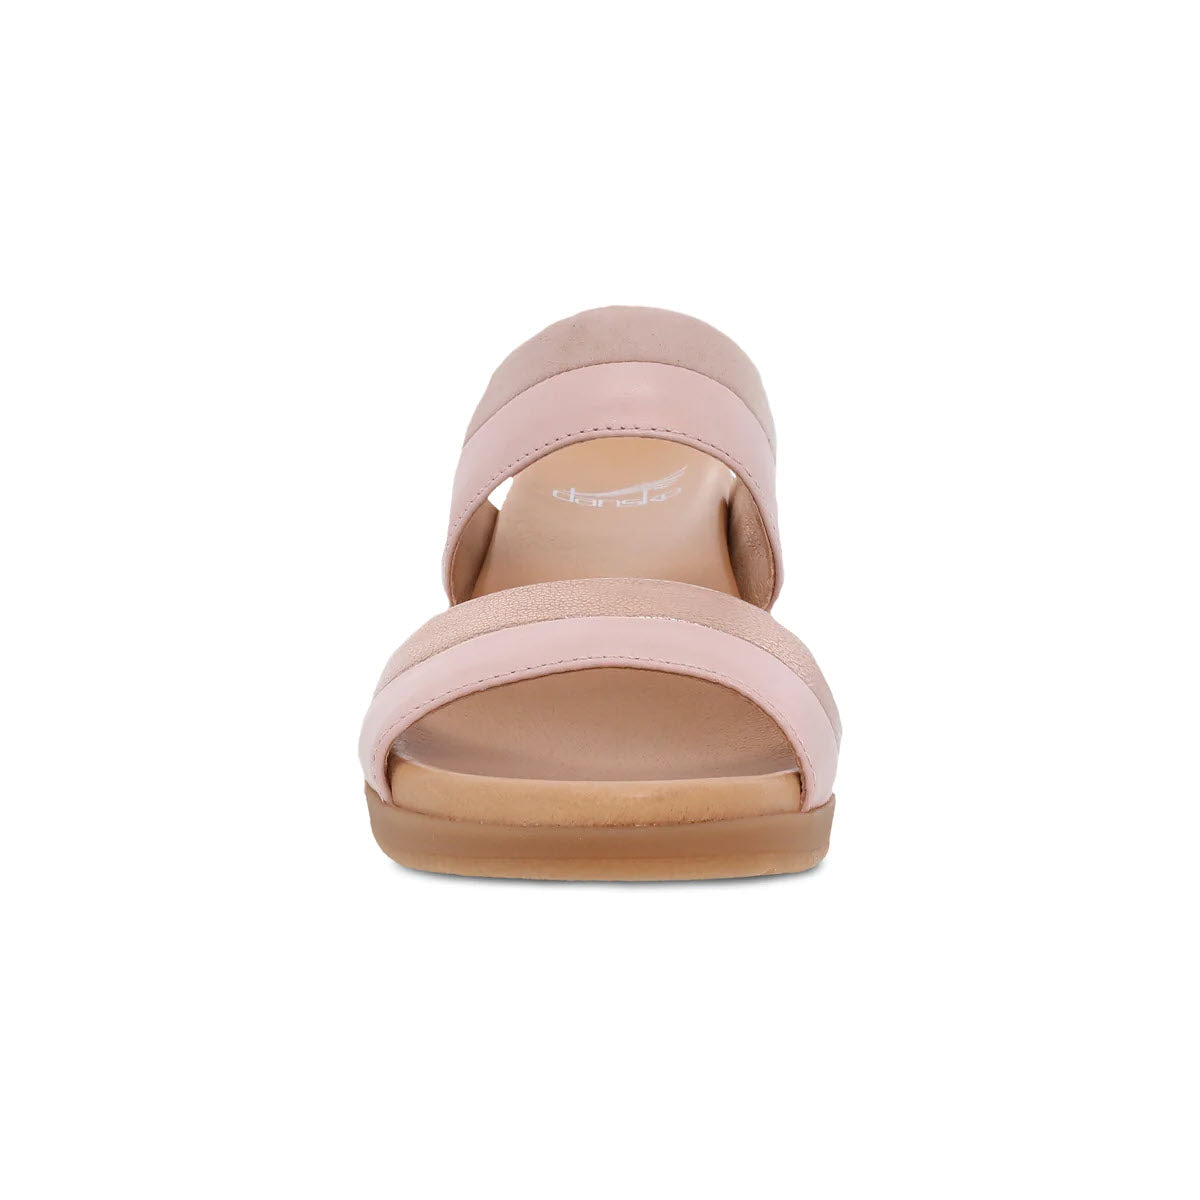 Front view of a single Dansko Theresa Blush Multi sandal with a broad strap and a flat sole, ideal for an anytime heel addition to your sandal wardrobe, on a white background.